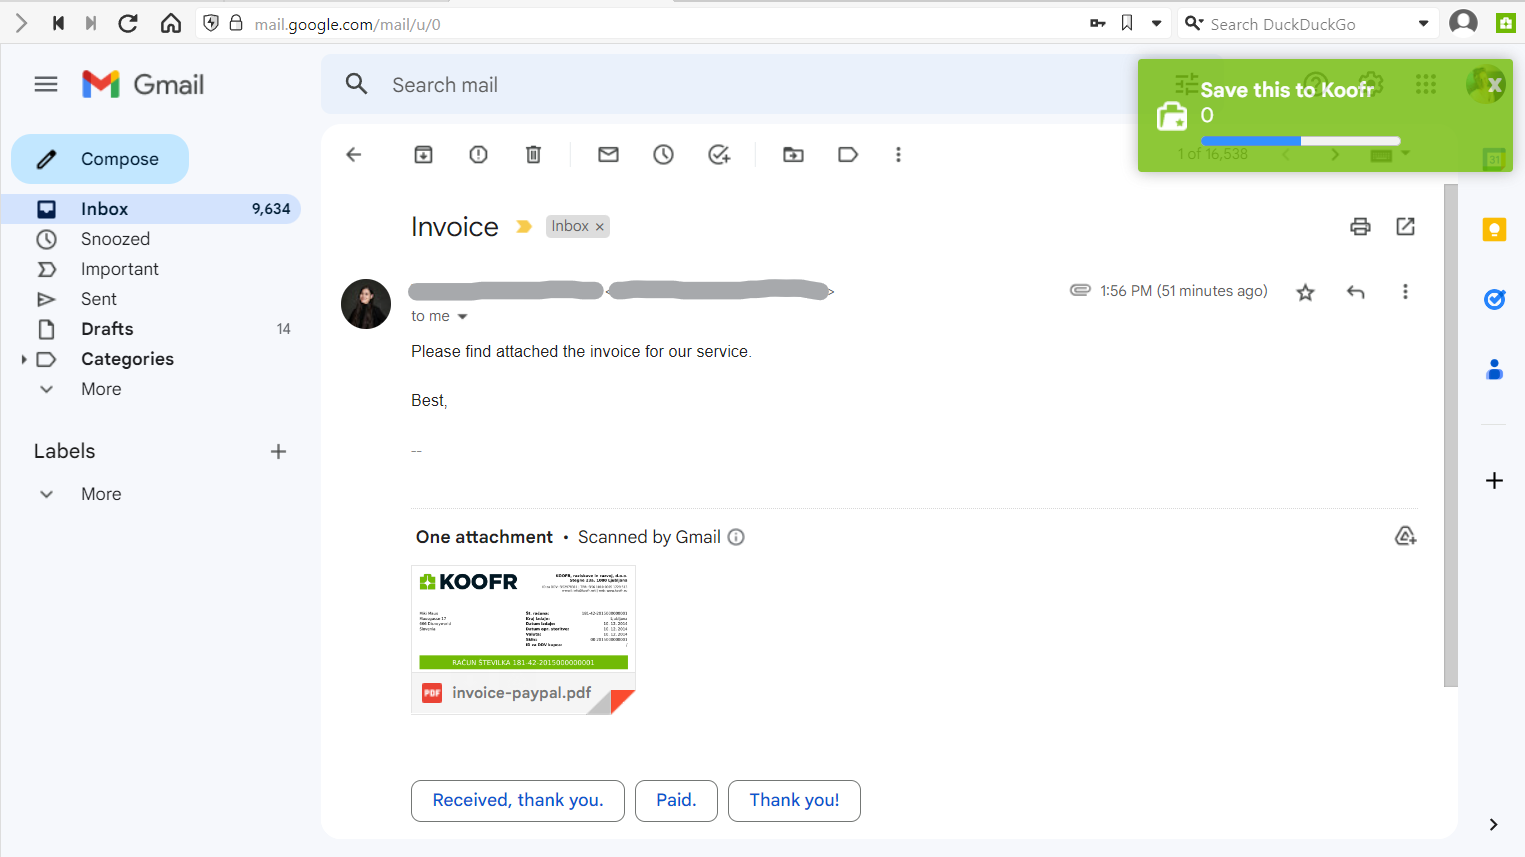 Using Save to Koofr to save an attachment in Gmail in Vivaldi browser.